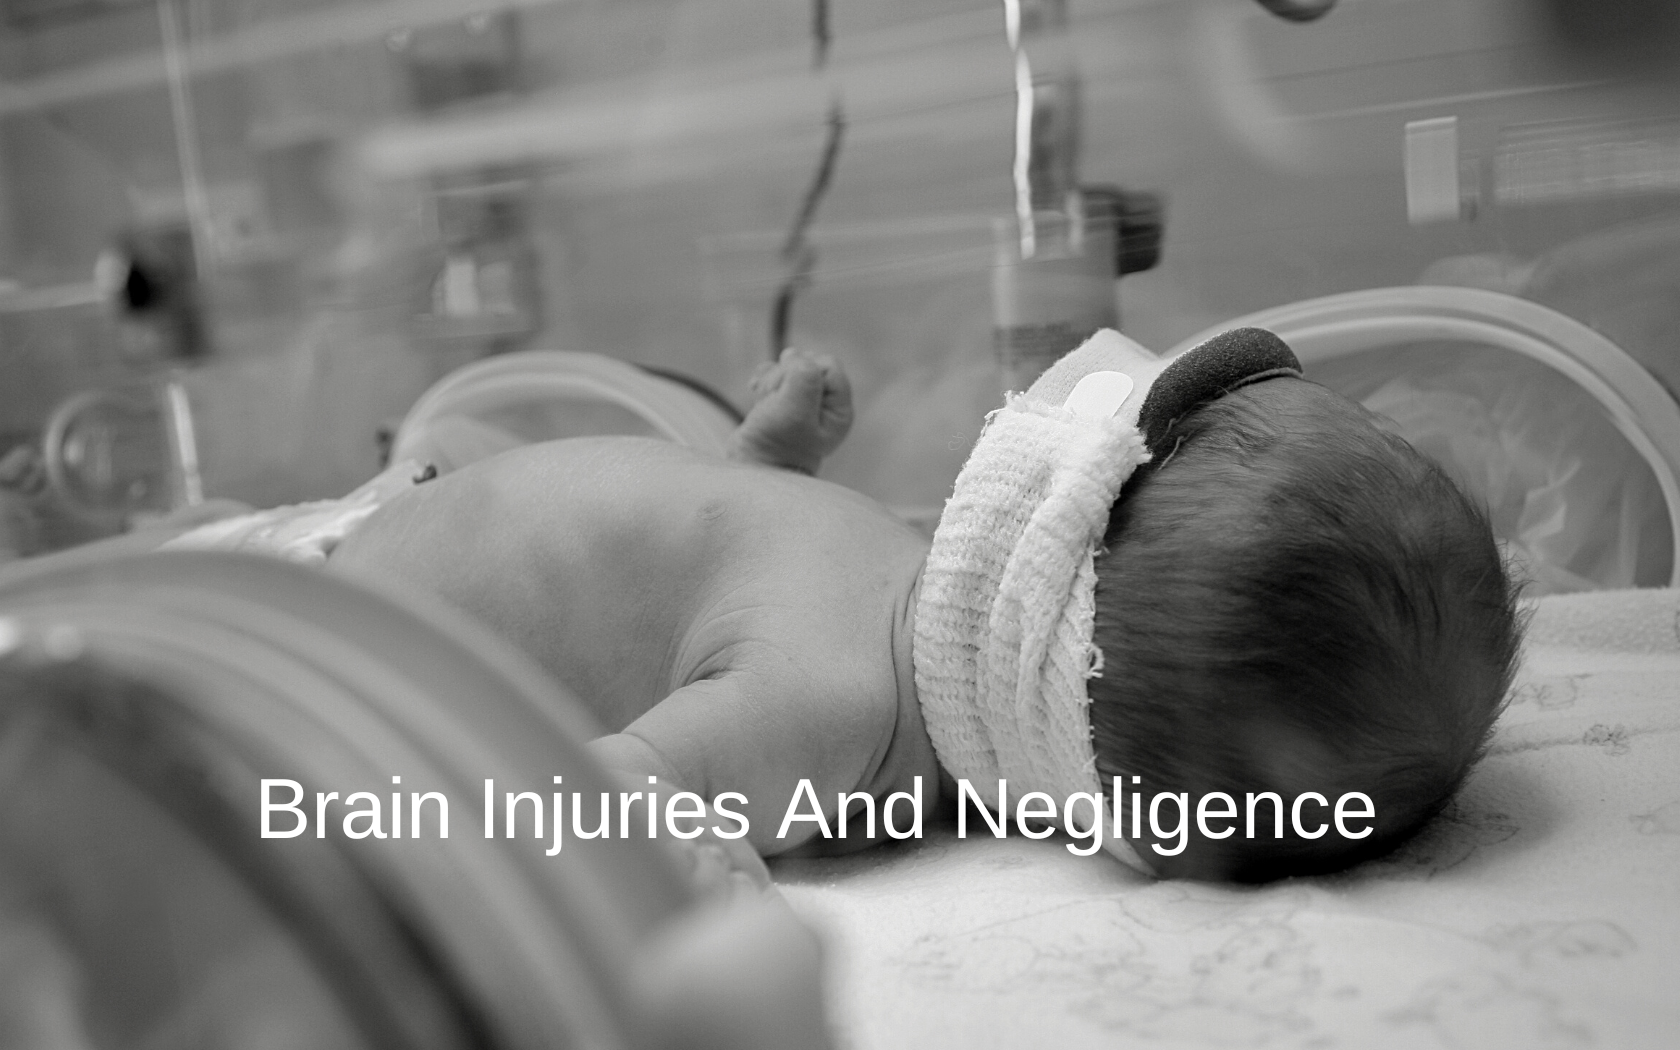 Baby suffering due to negligence.